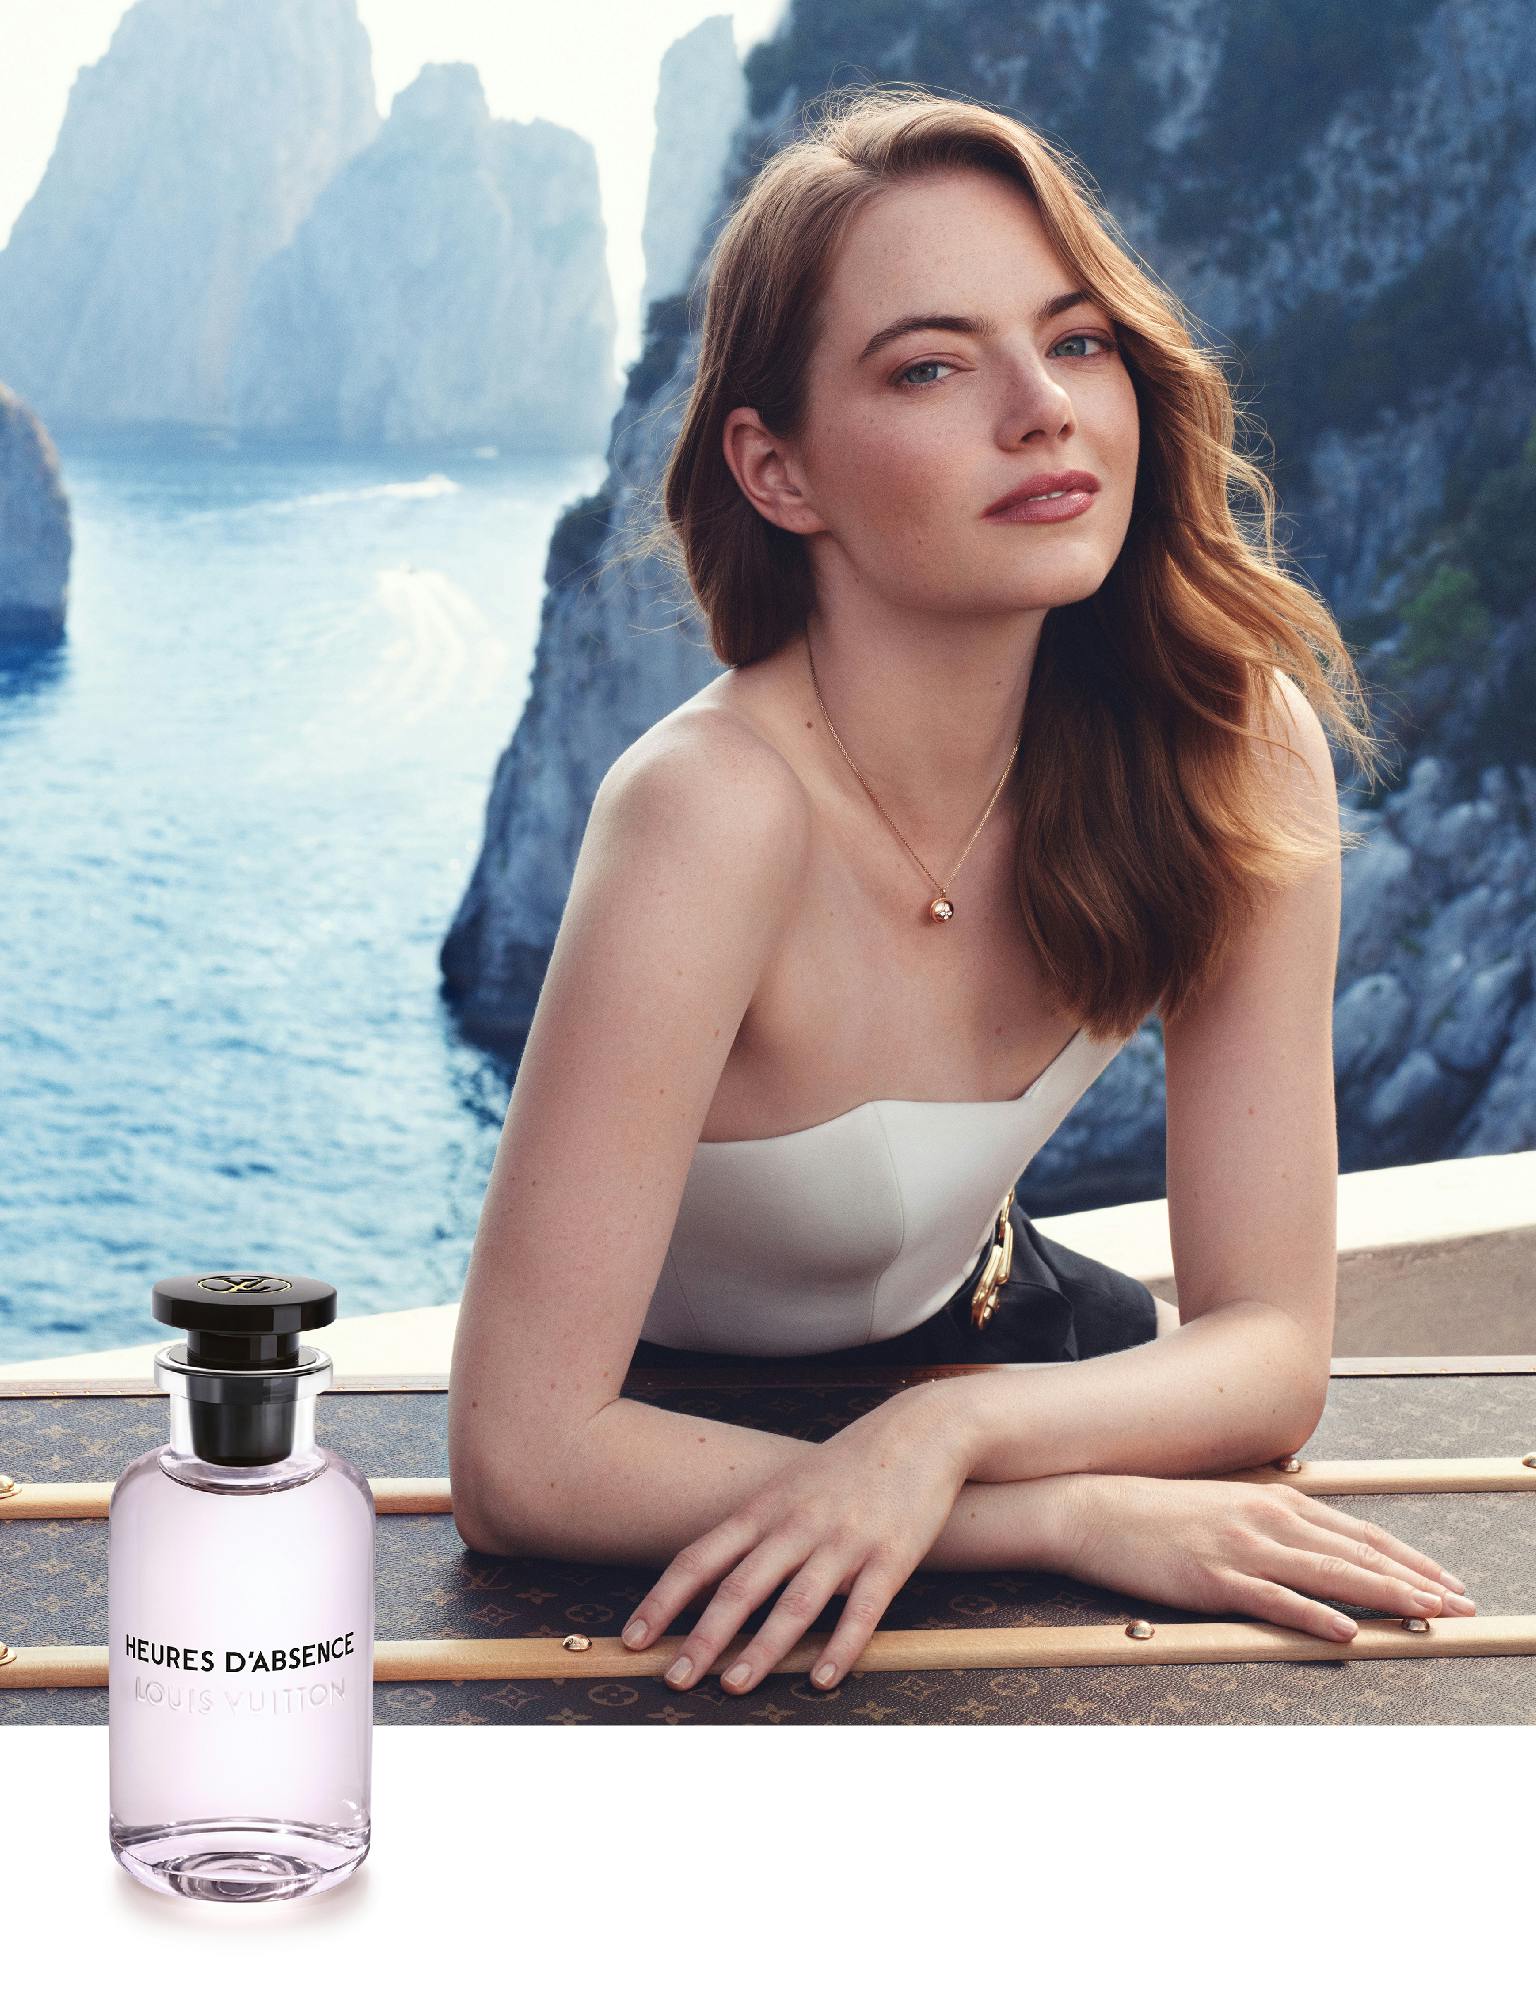 Emma Stone in Louis Vuitton's first perfume campaign – You and I